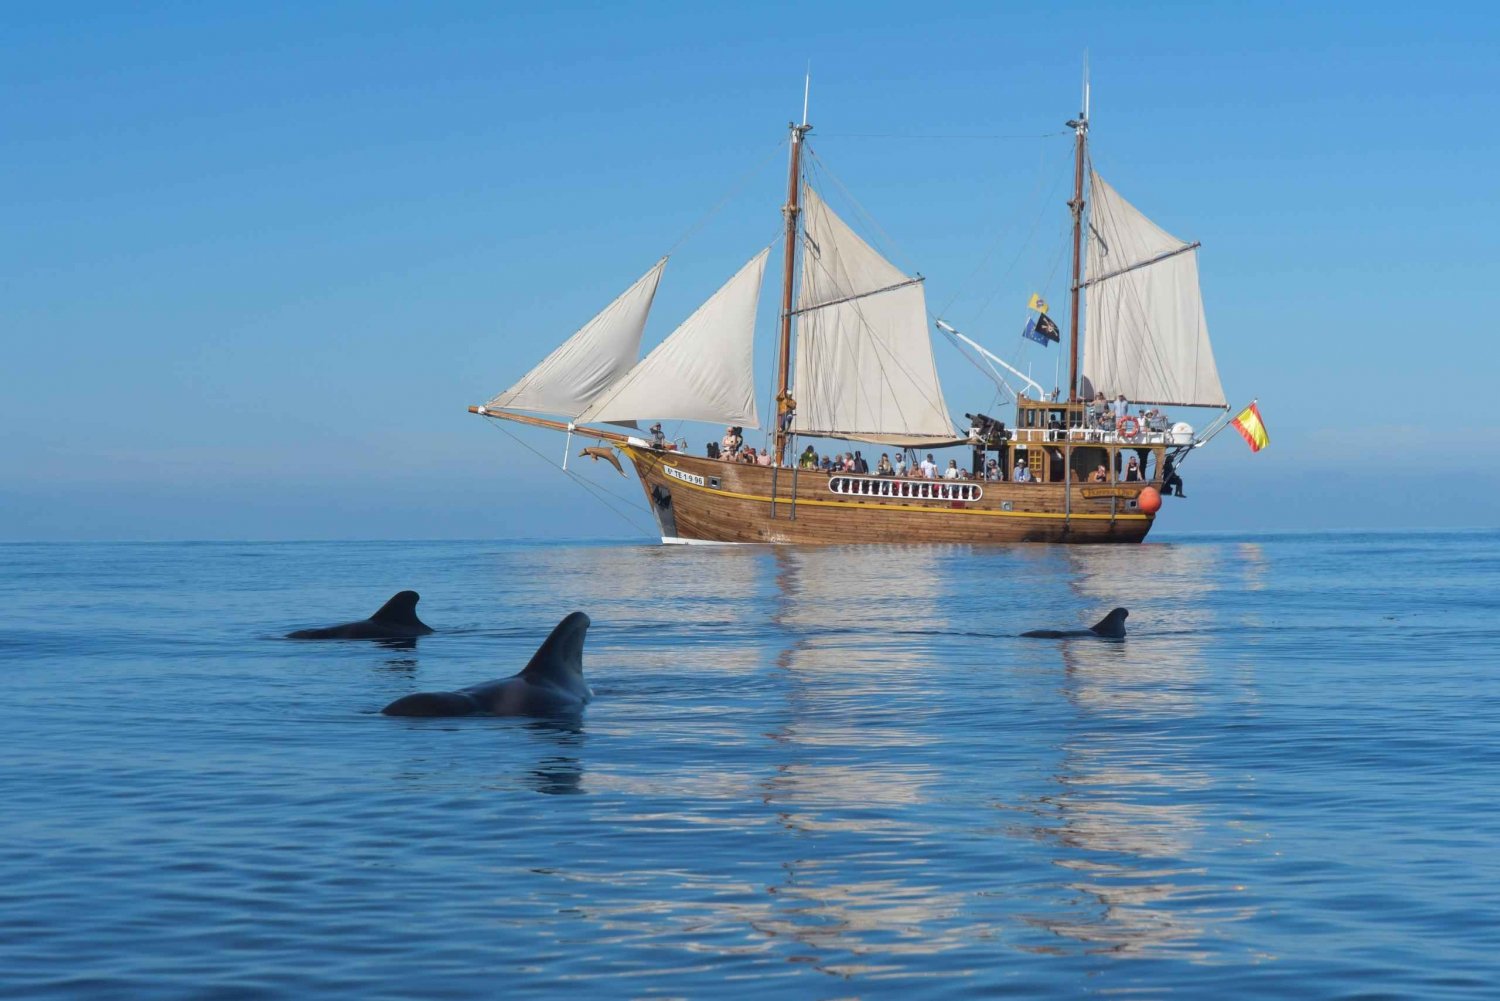 Los Gigantes: Dolphin and Whale Watching Tour with Drinks